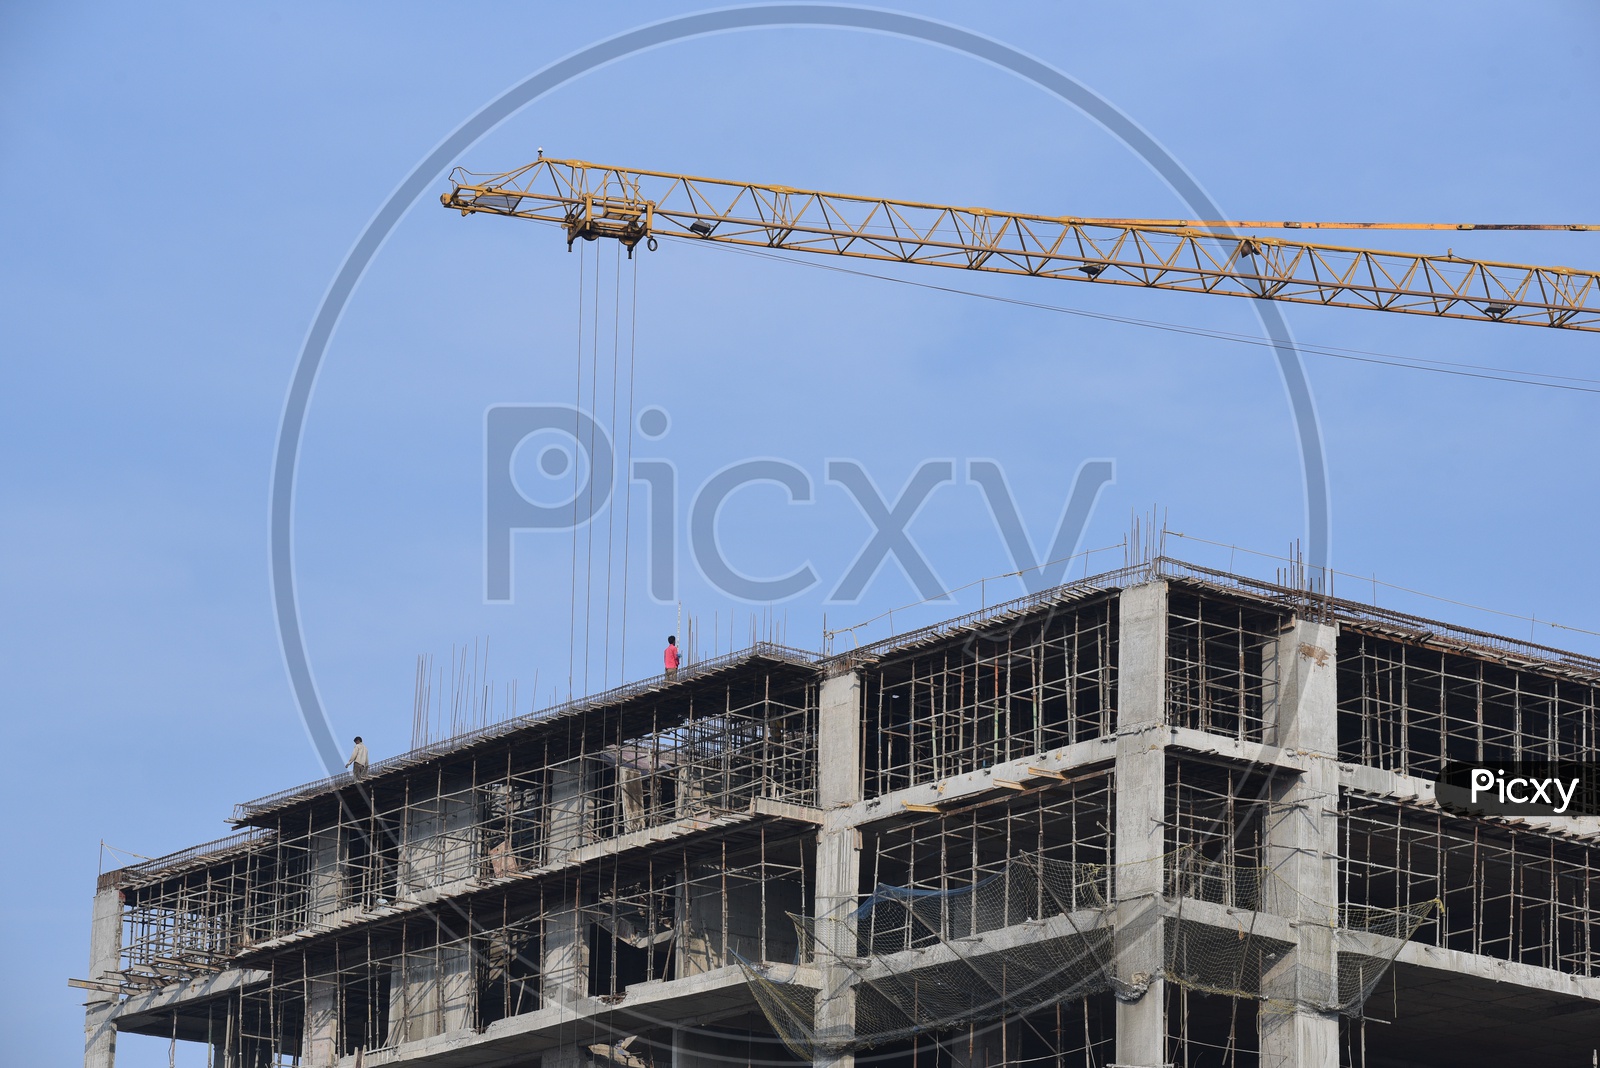 Under Construction  Buildings Or Apartments With Crane And Construction Workers